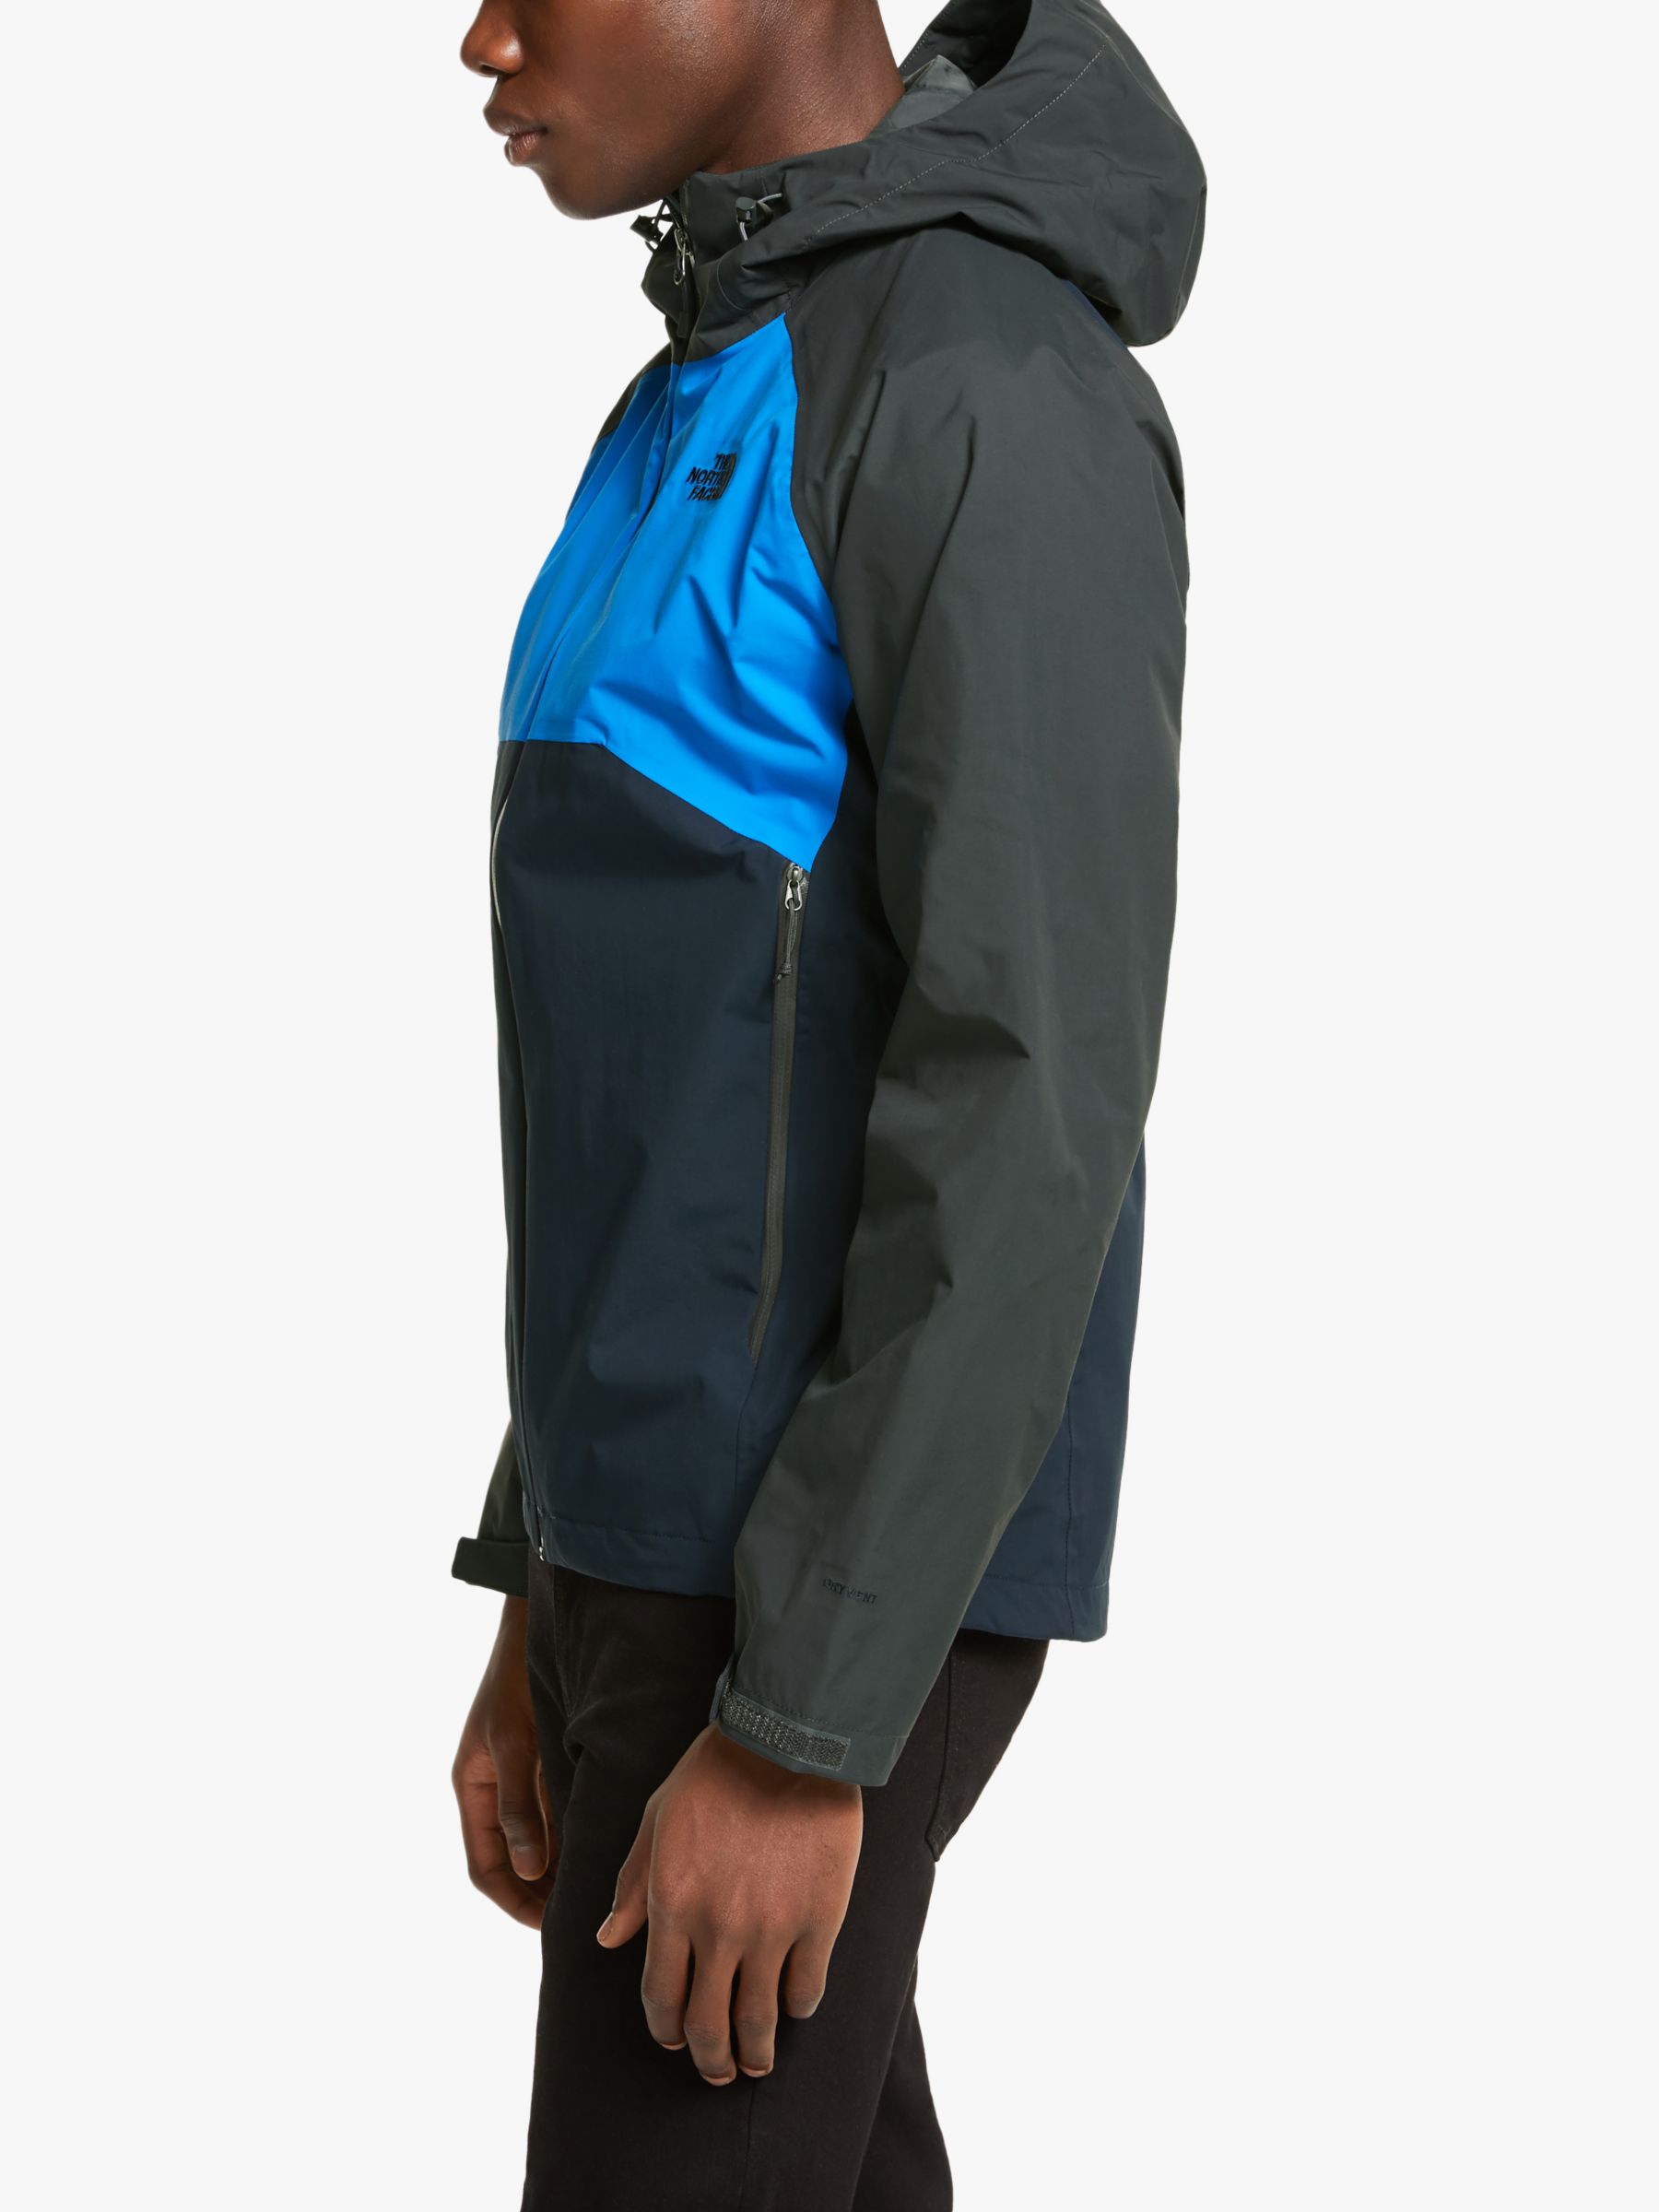 north face stratos jacket blue